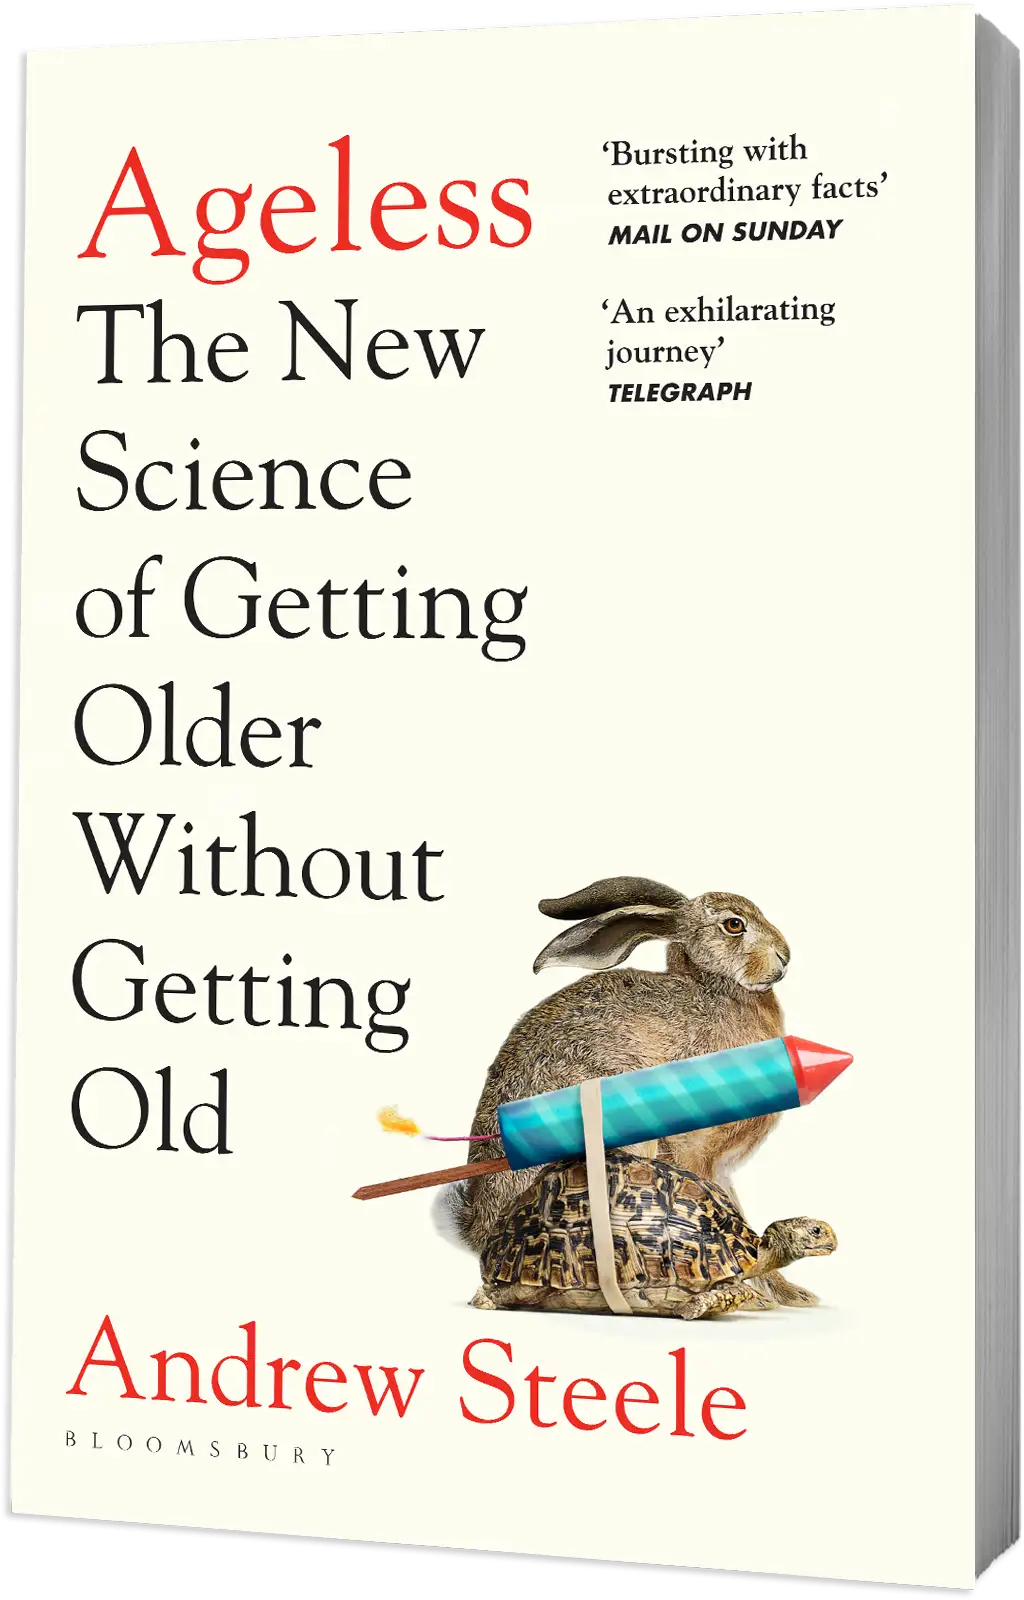 Paperback copy of Ageless: The New Science of Getting Older Without Getting Old, by Andrew Steele.